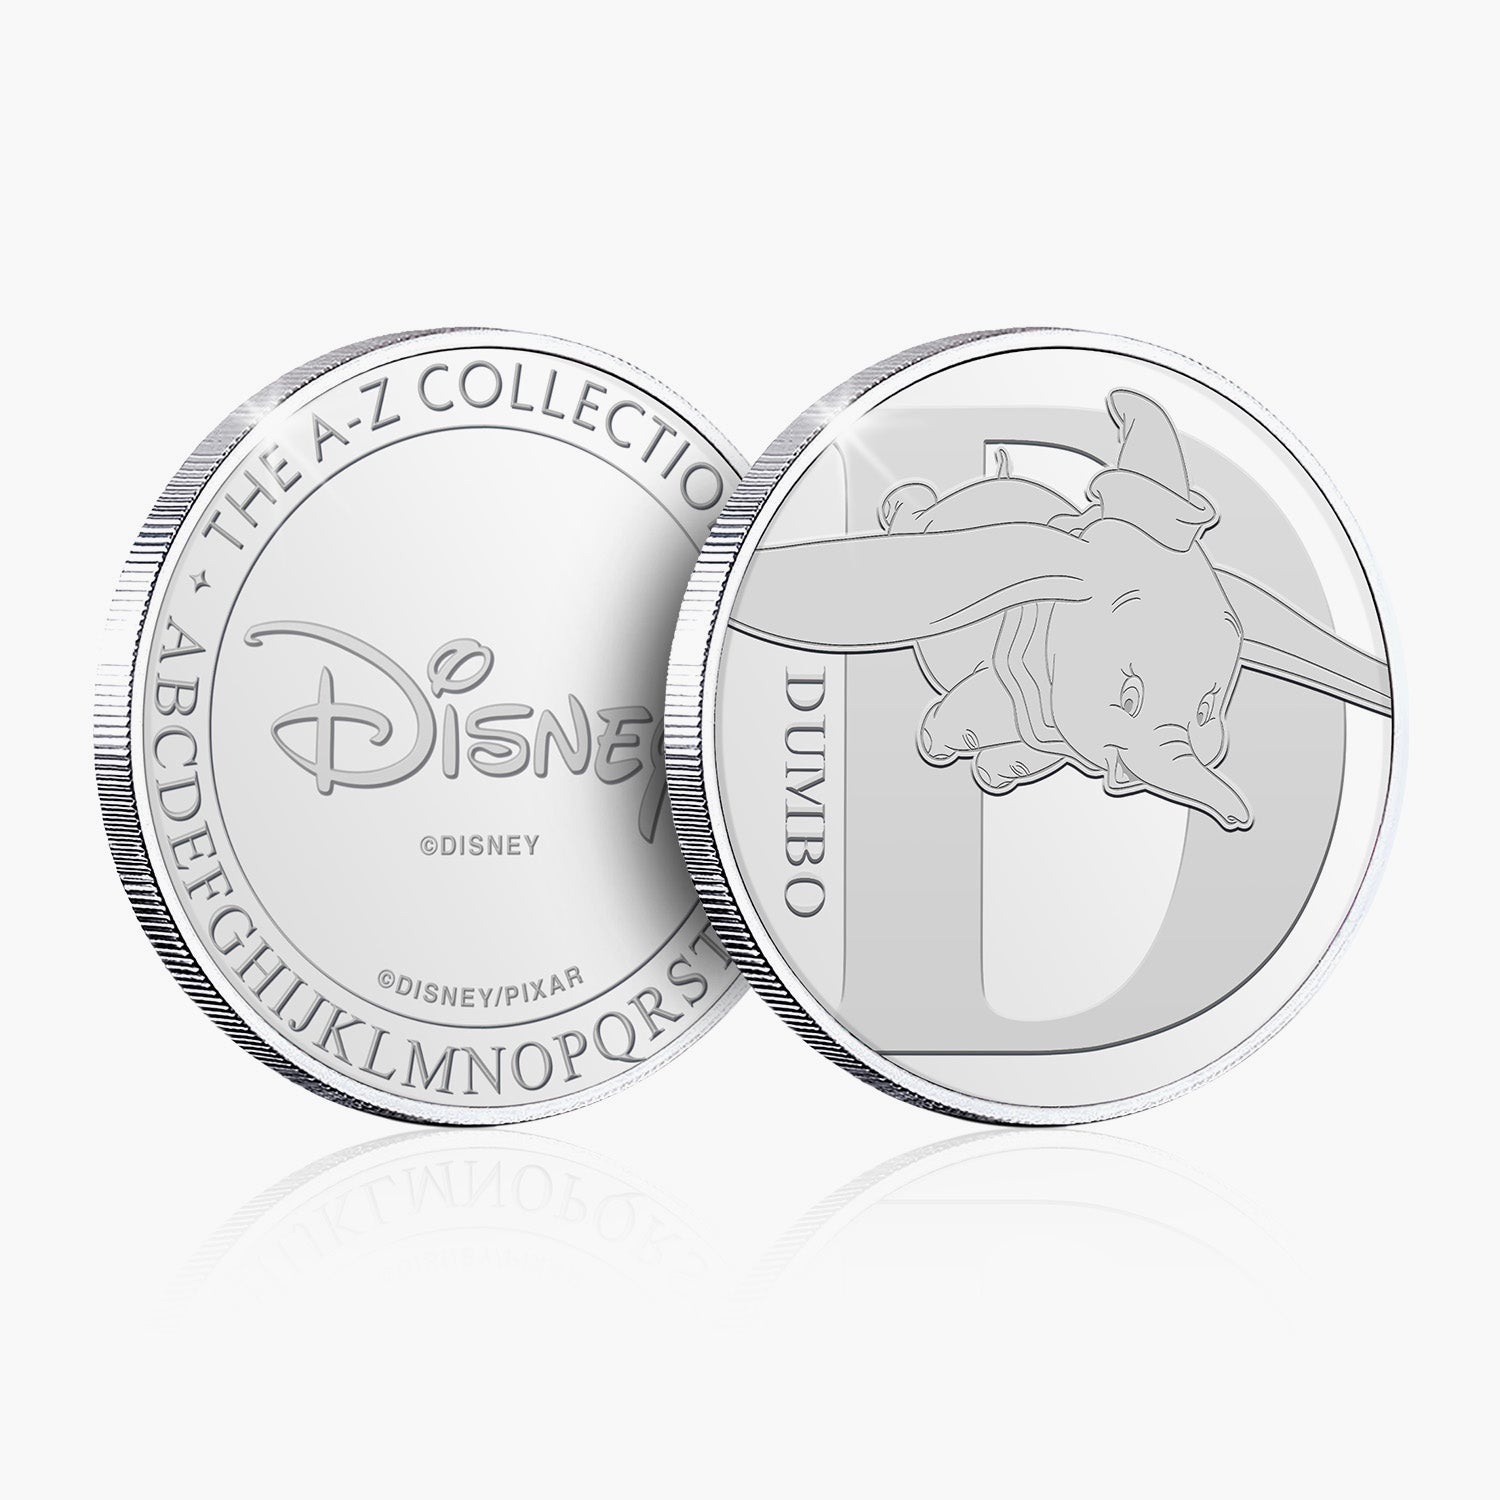 D is for Dumbo Silver-Plated Commemorative